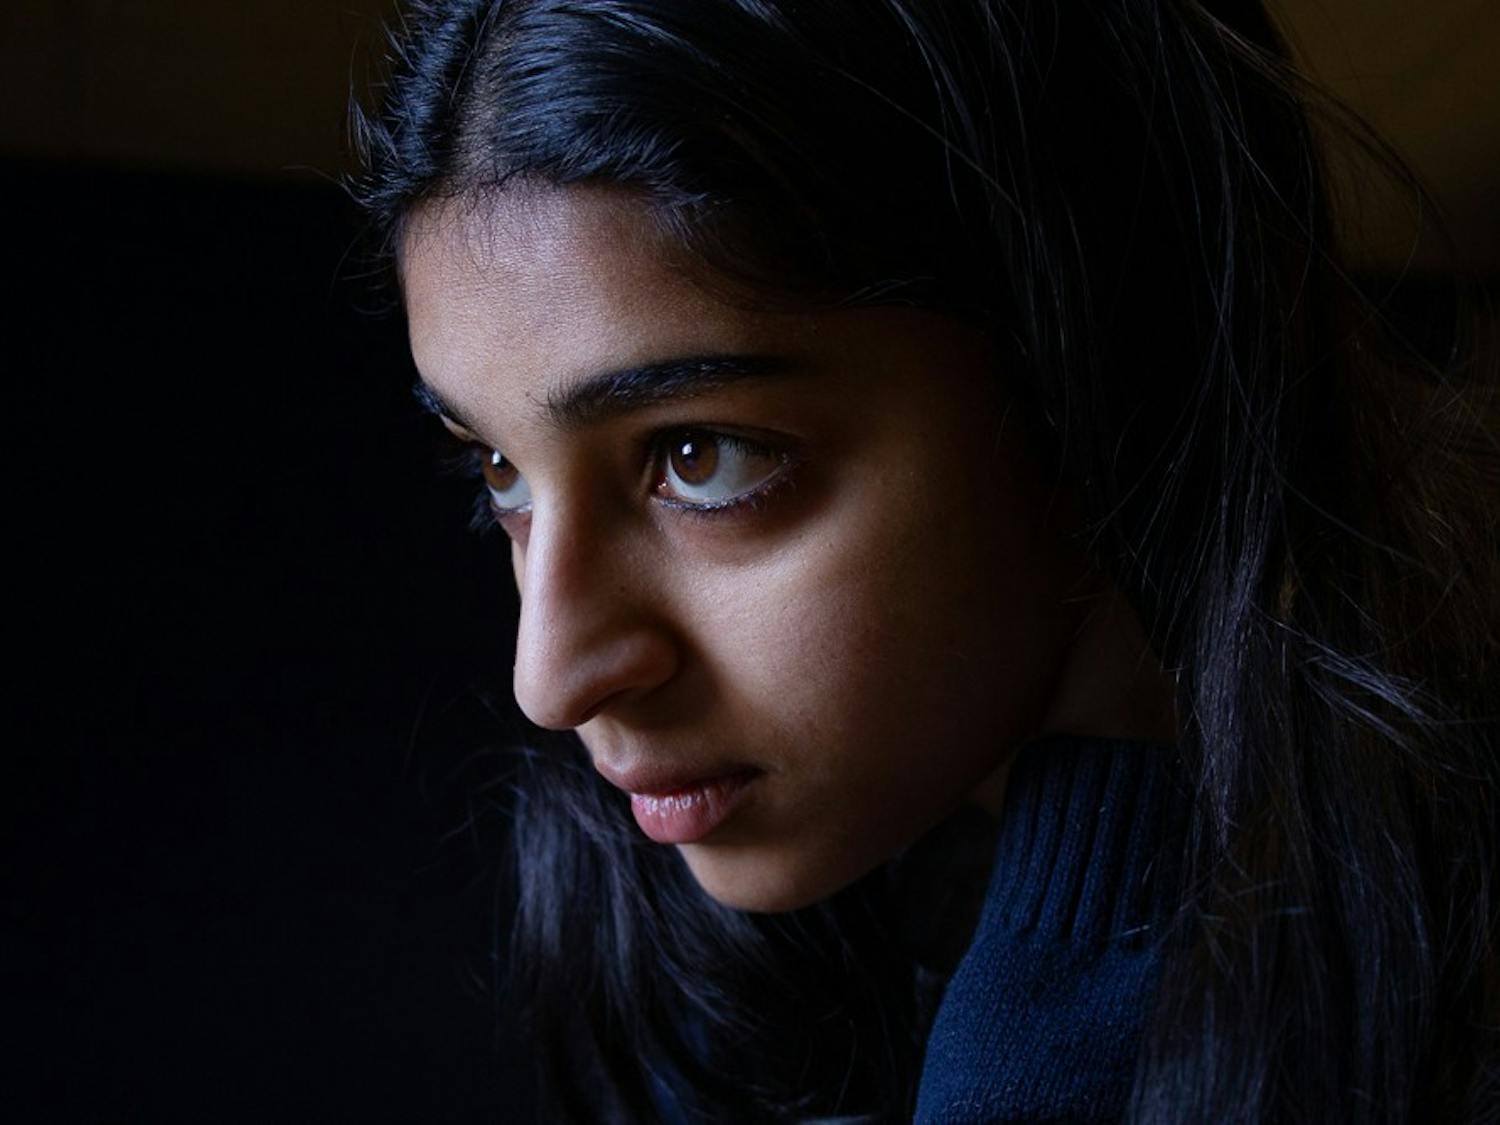 Vennela Medapati, a senior media and journalism major, is photographed in Davis Library on Friday, Feb. 21, 2020.&nbsp;